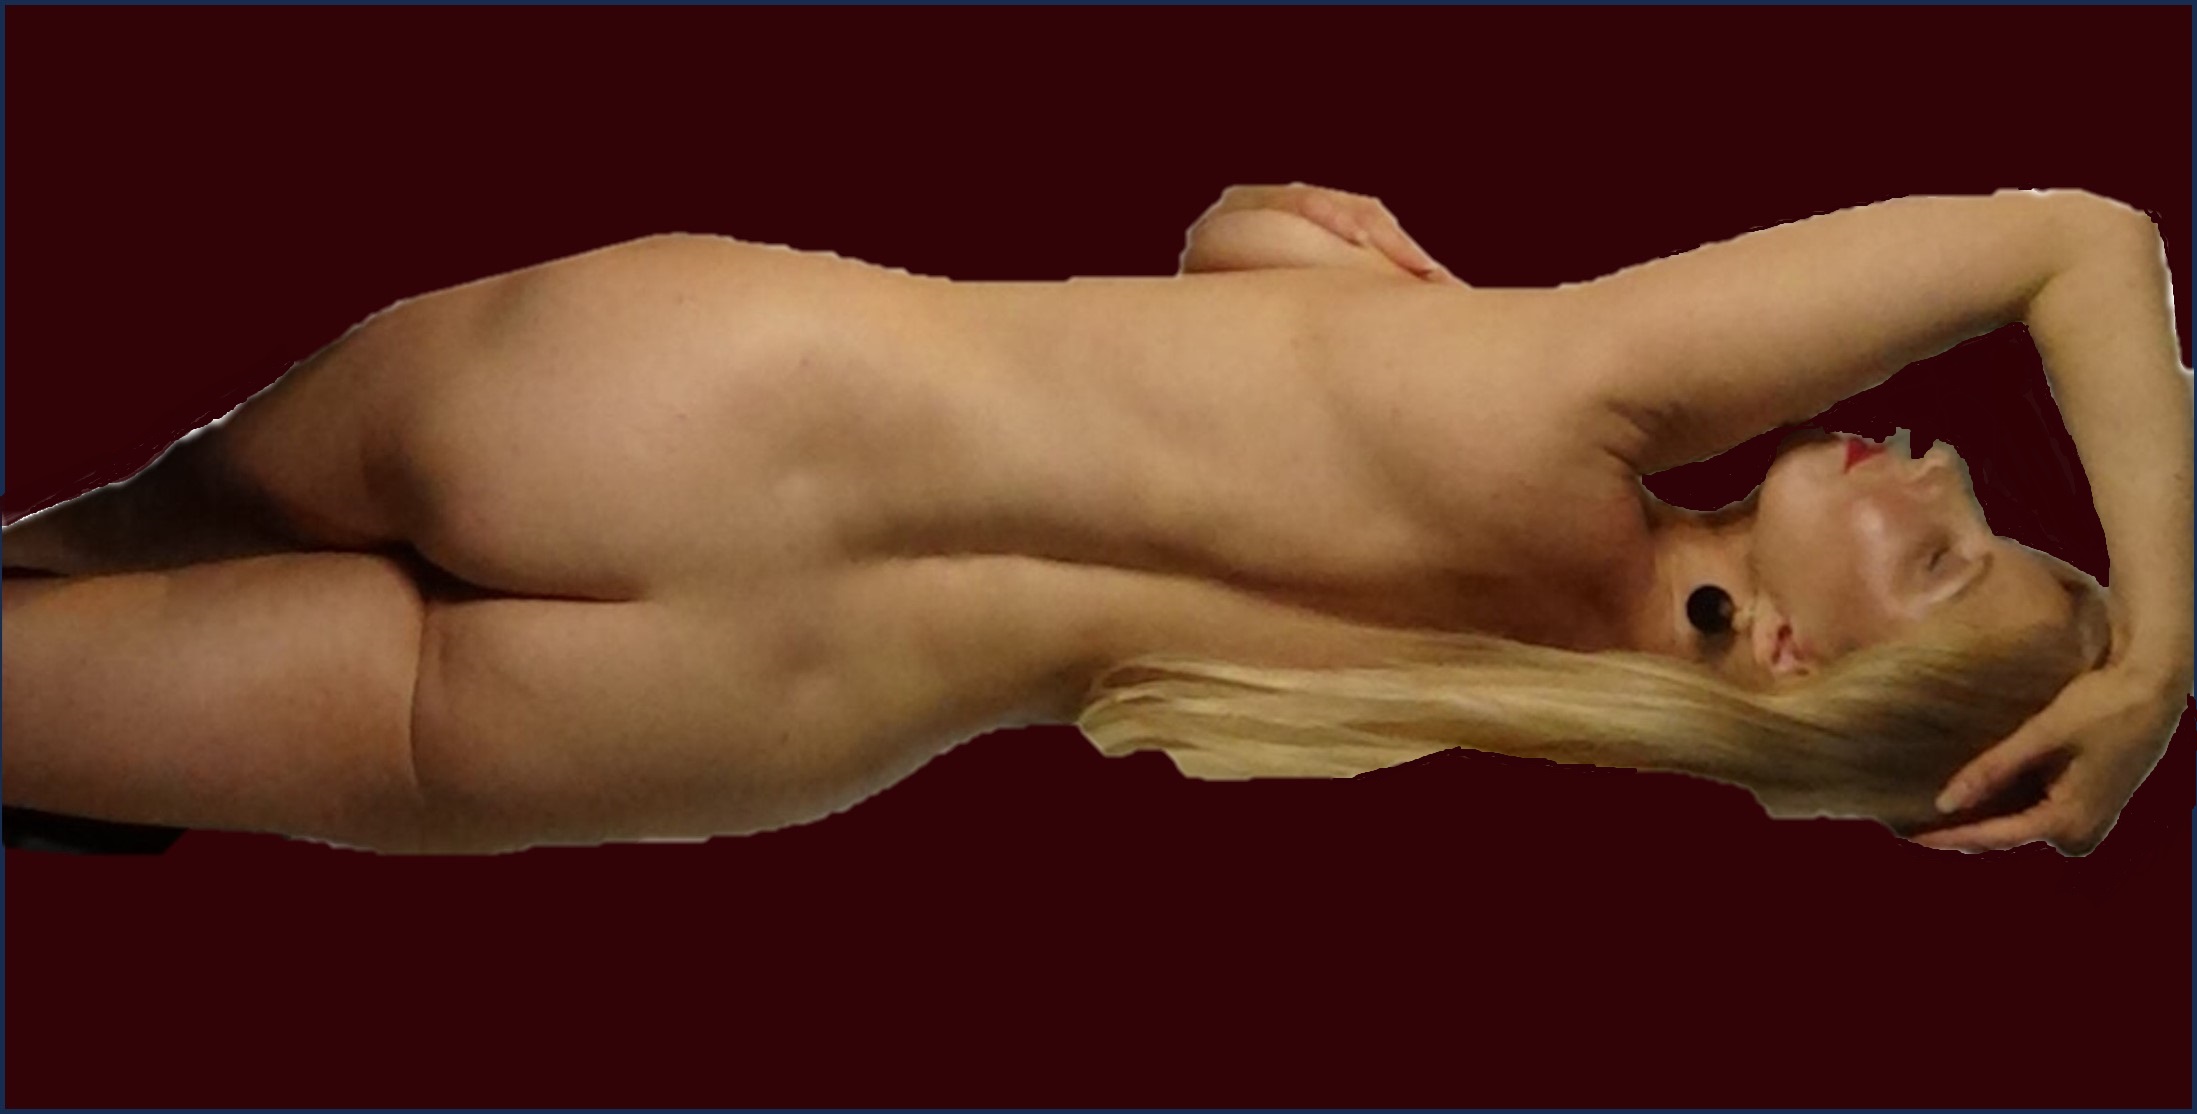 Francesca, lying naked, with back to the camera. Her slender shape and beautiful buttocks are a delight